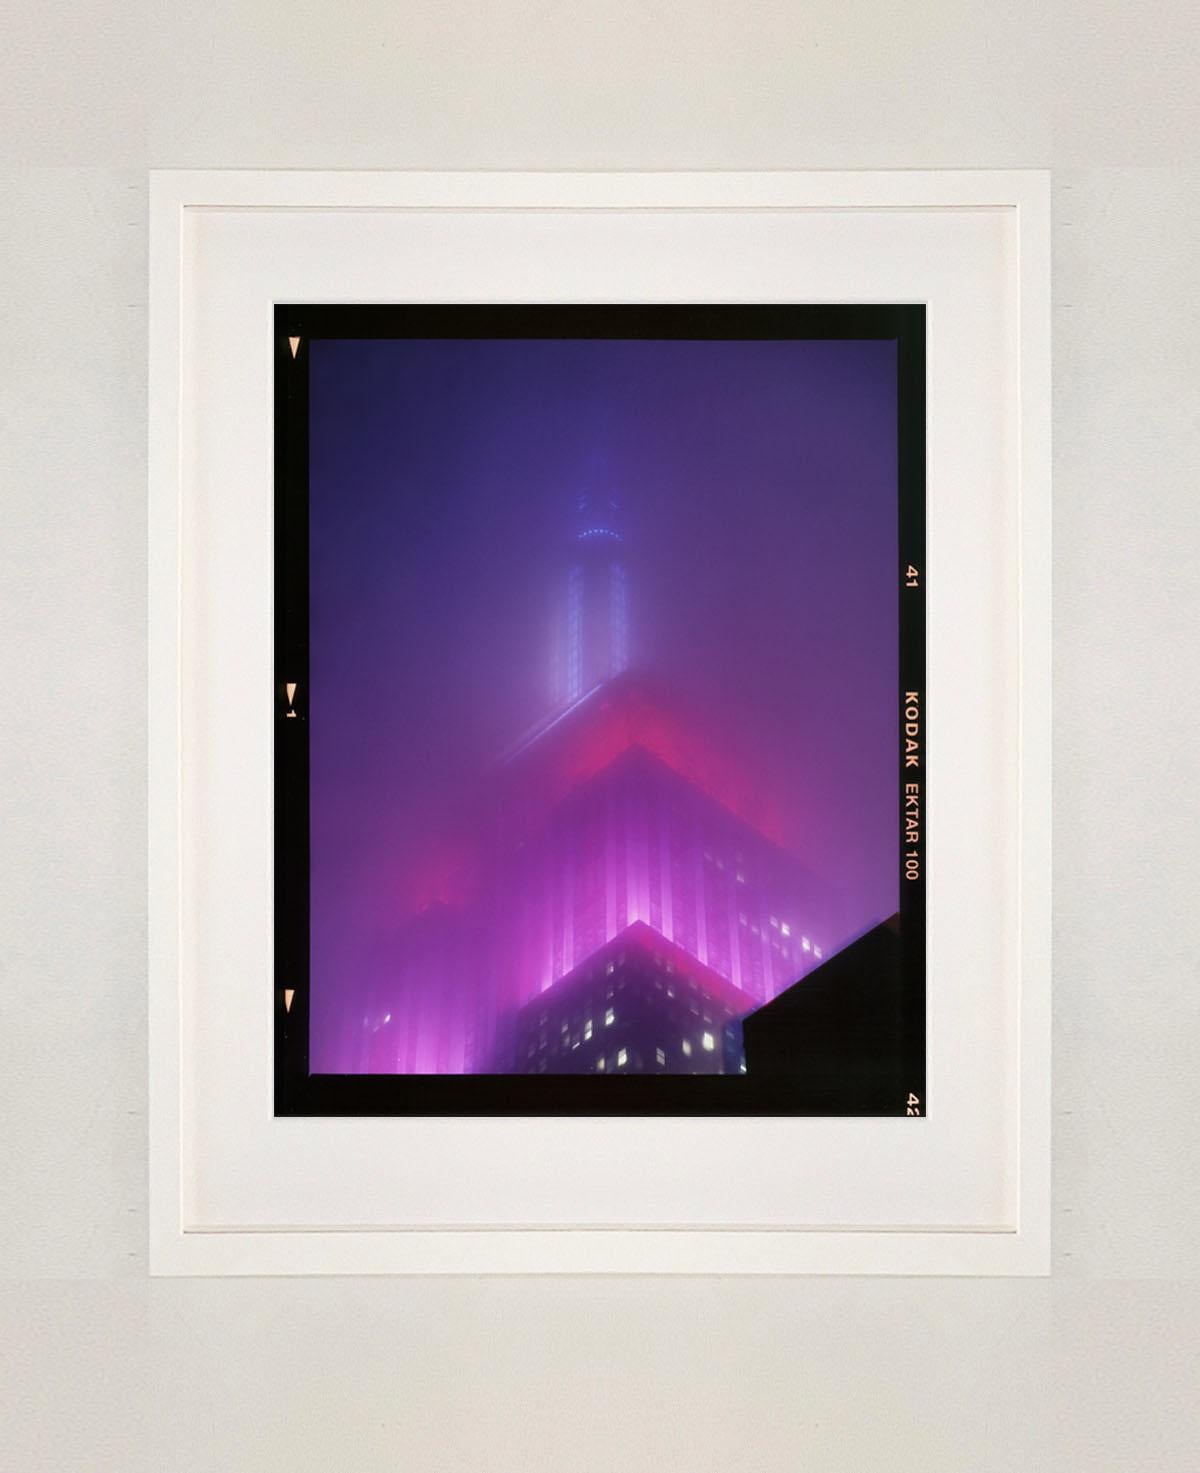 NOMAD V (Film Rebate), New York - Conceptual Architectural Color Photography - Contemporary Print by Richard Heeps